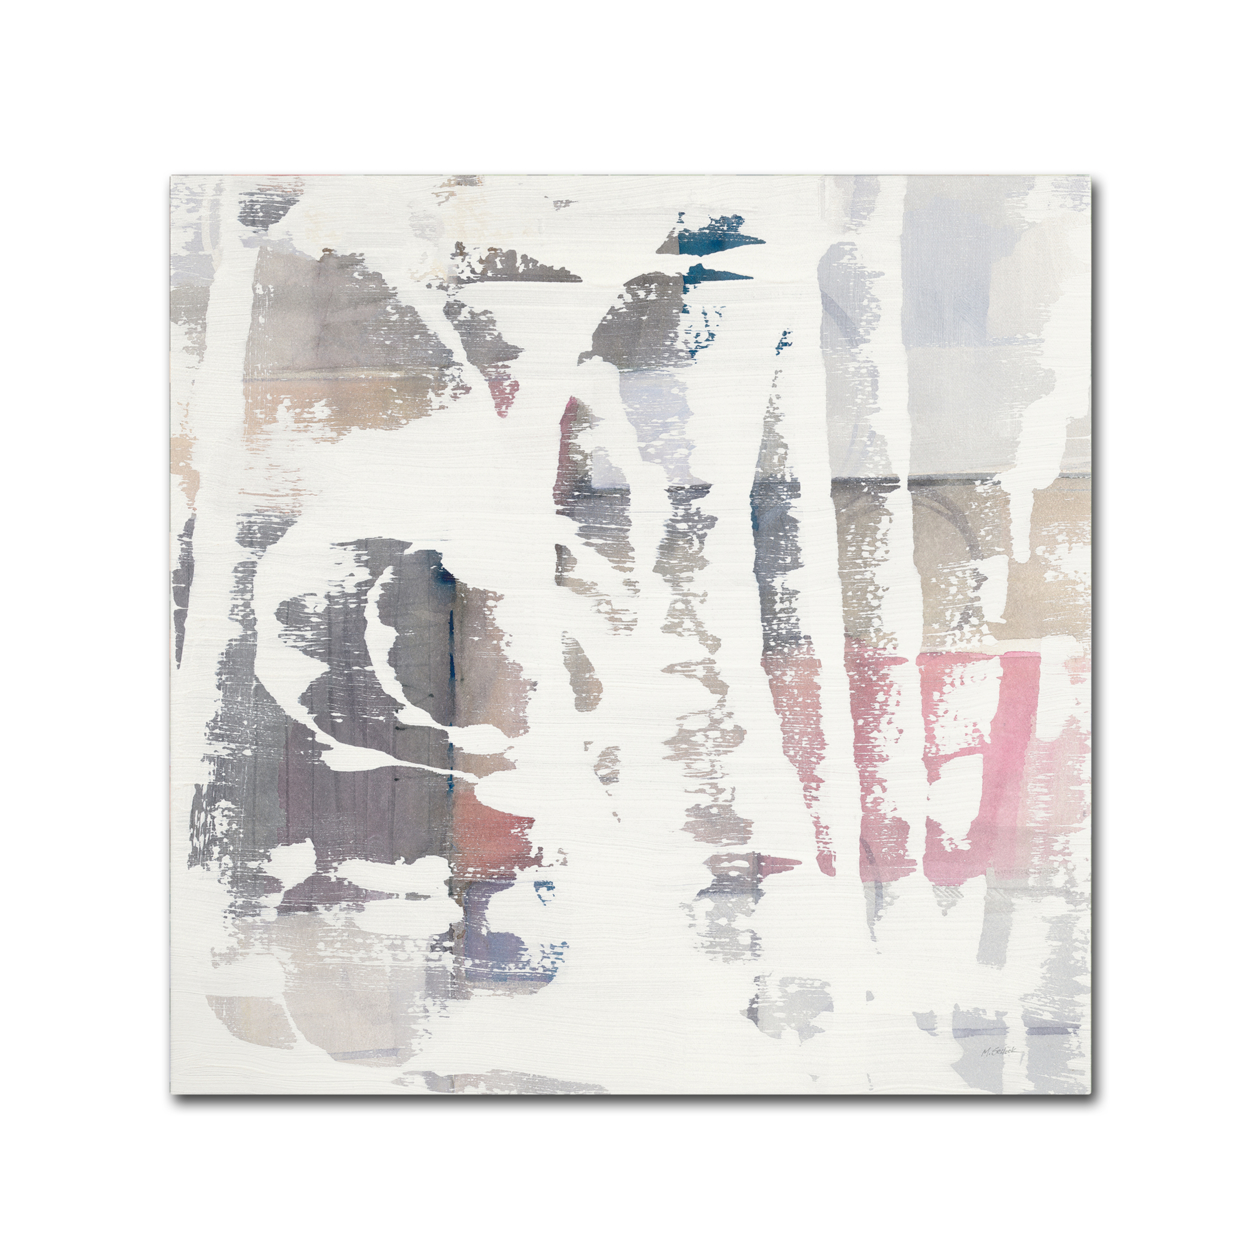 Mike Schick 'White Out Crop' Large Canvas Art 35 X 35